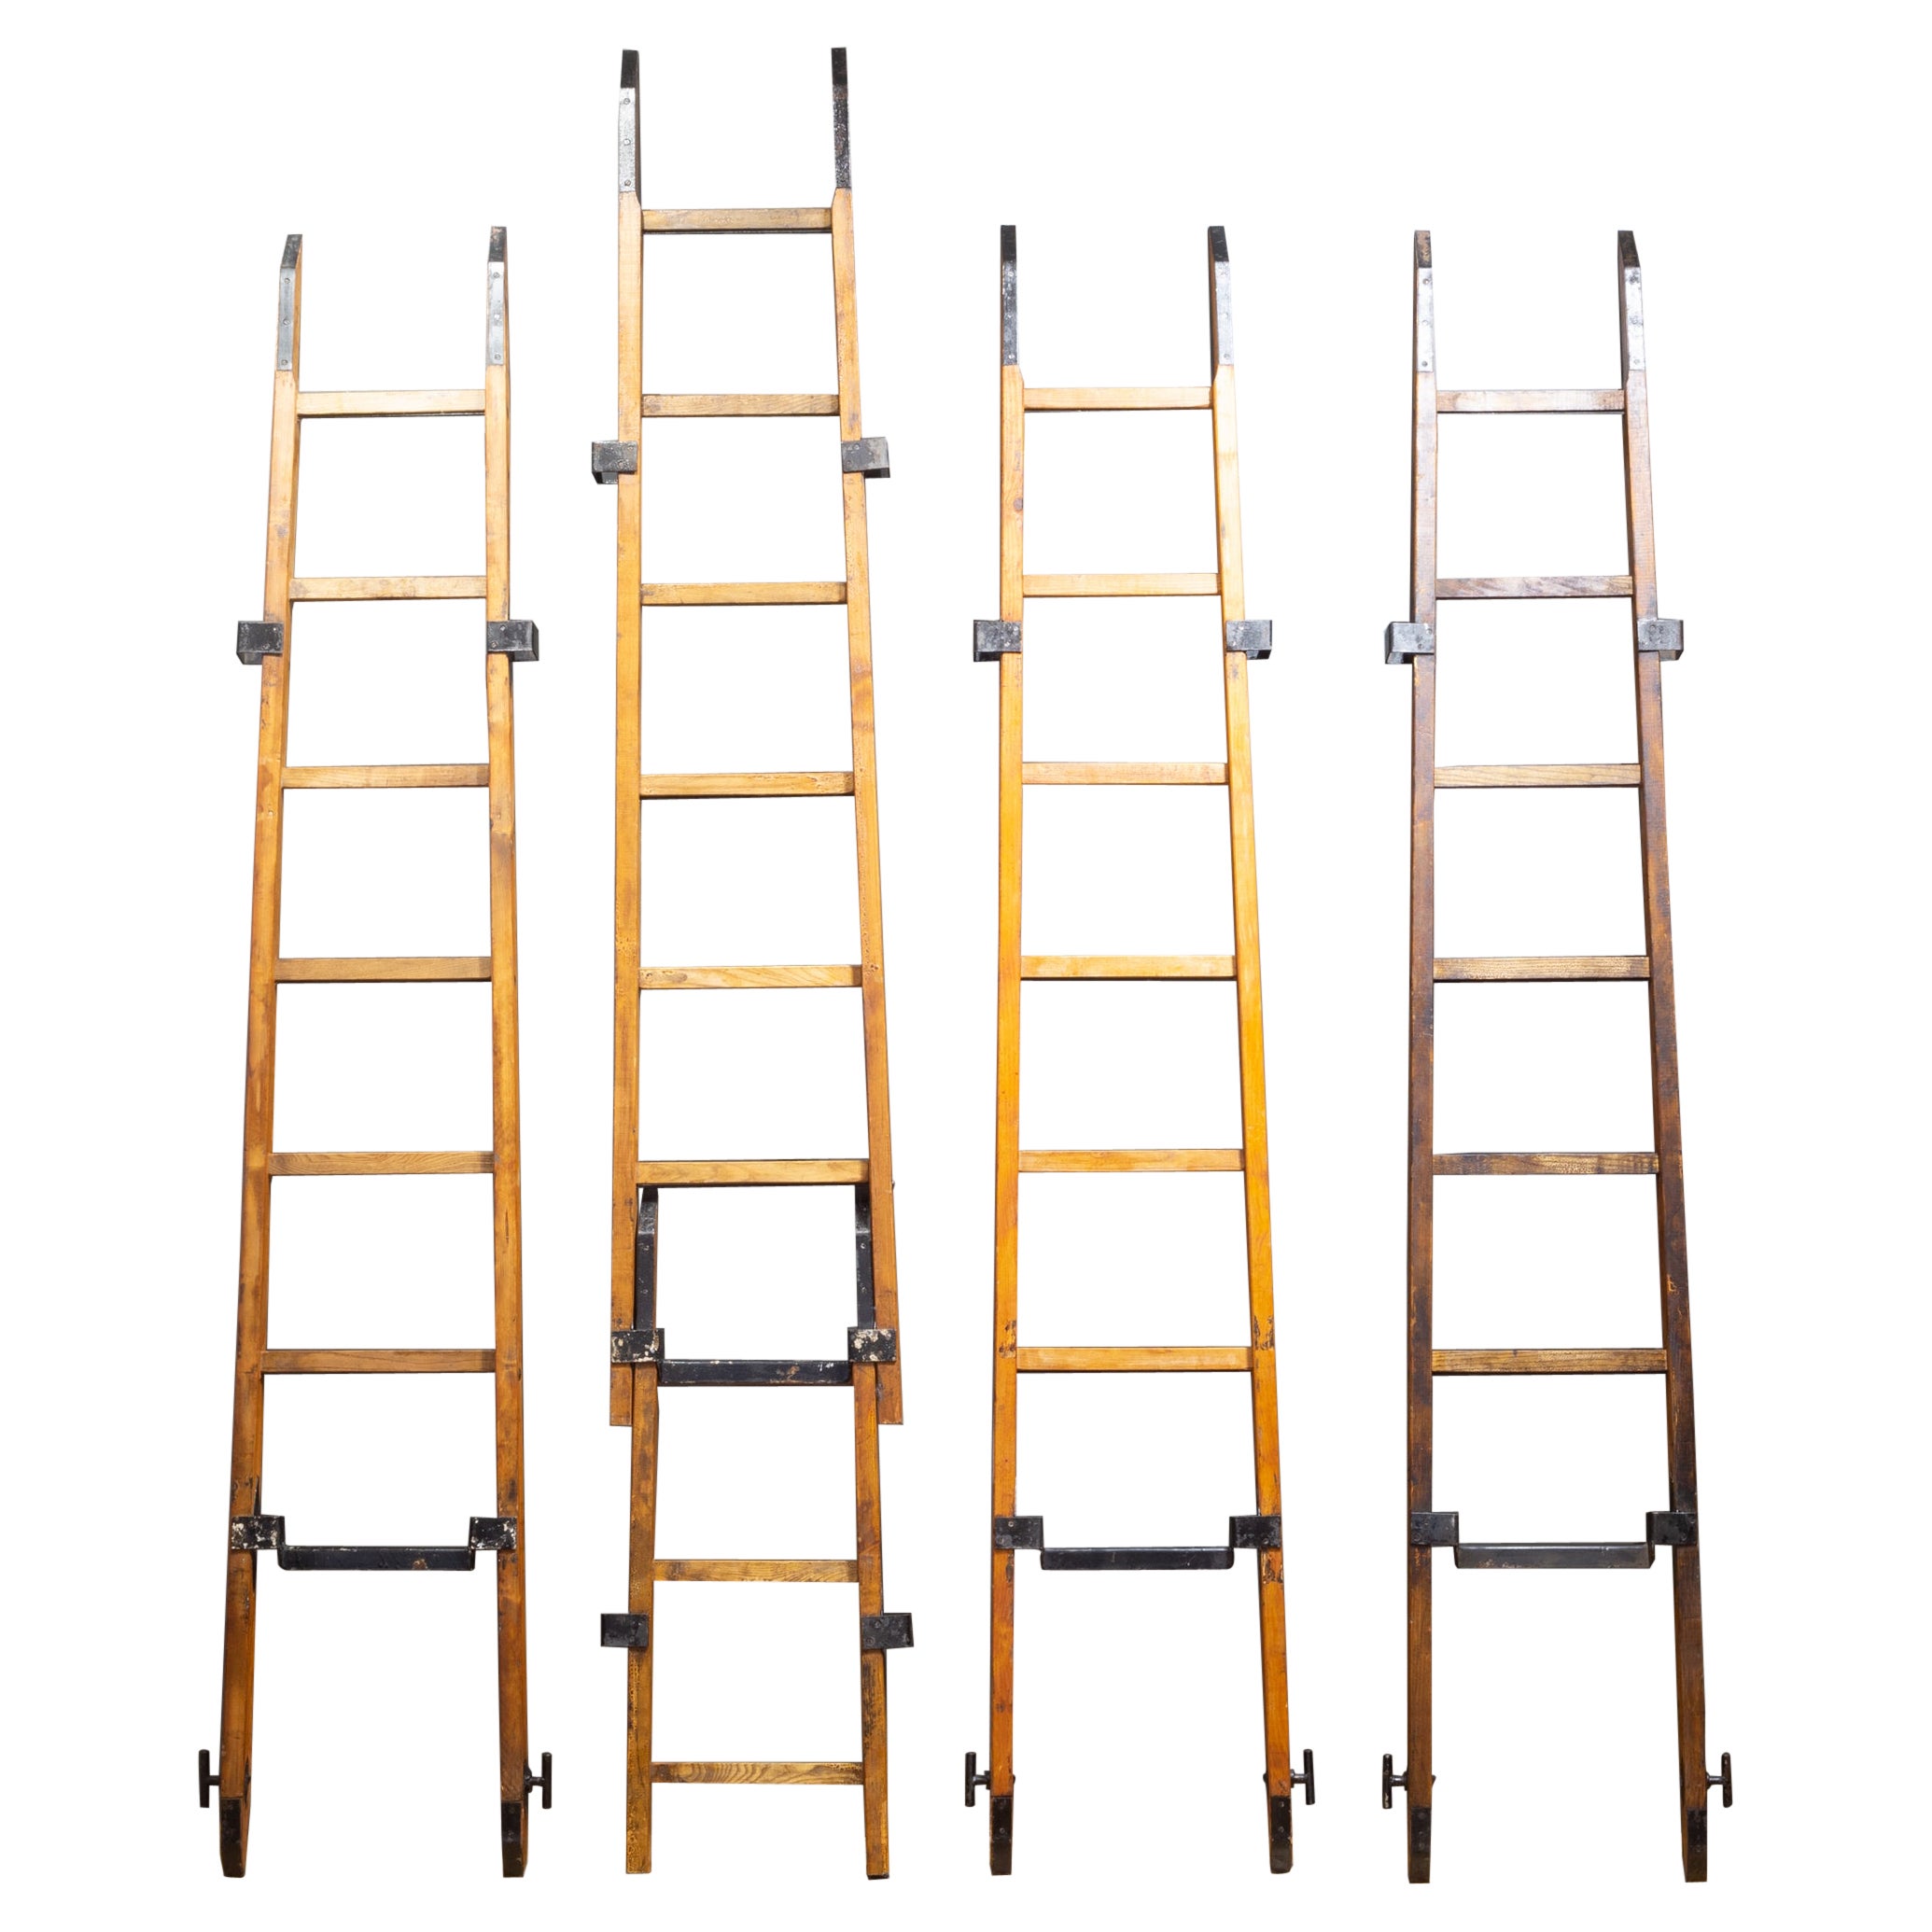 Mid-20th Century Ladders - 25 For Sale at 1stDibs